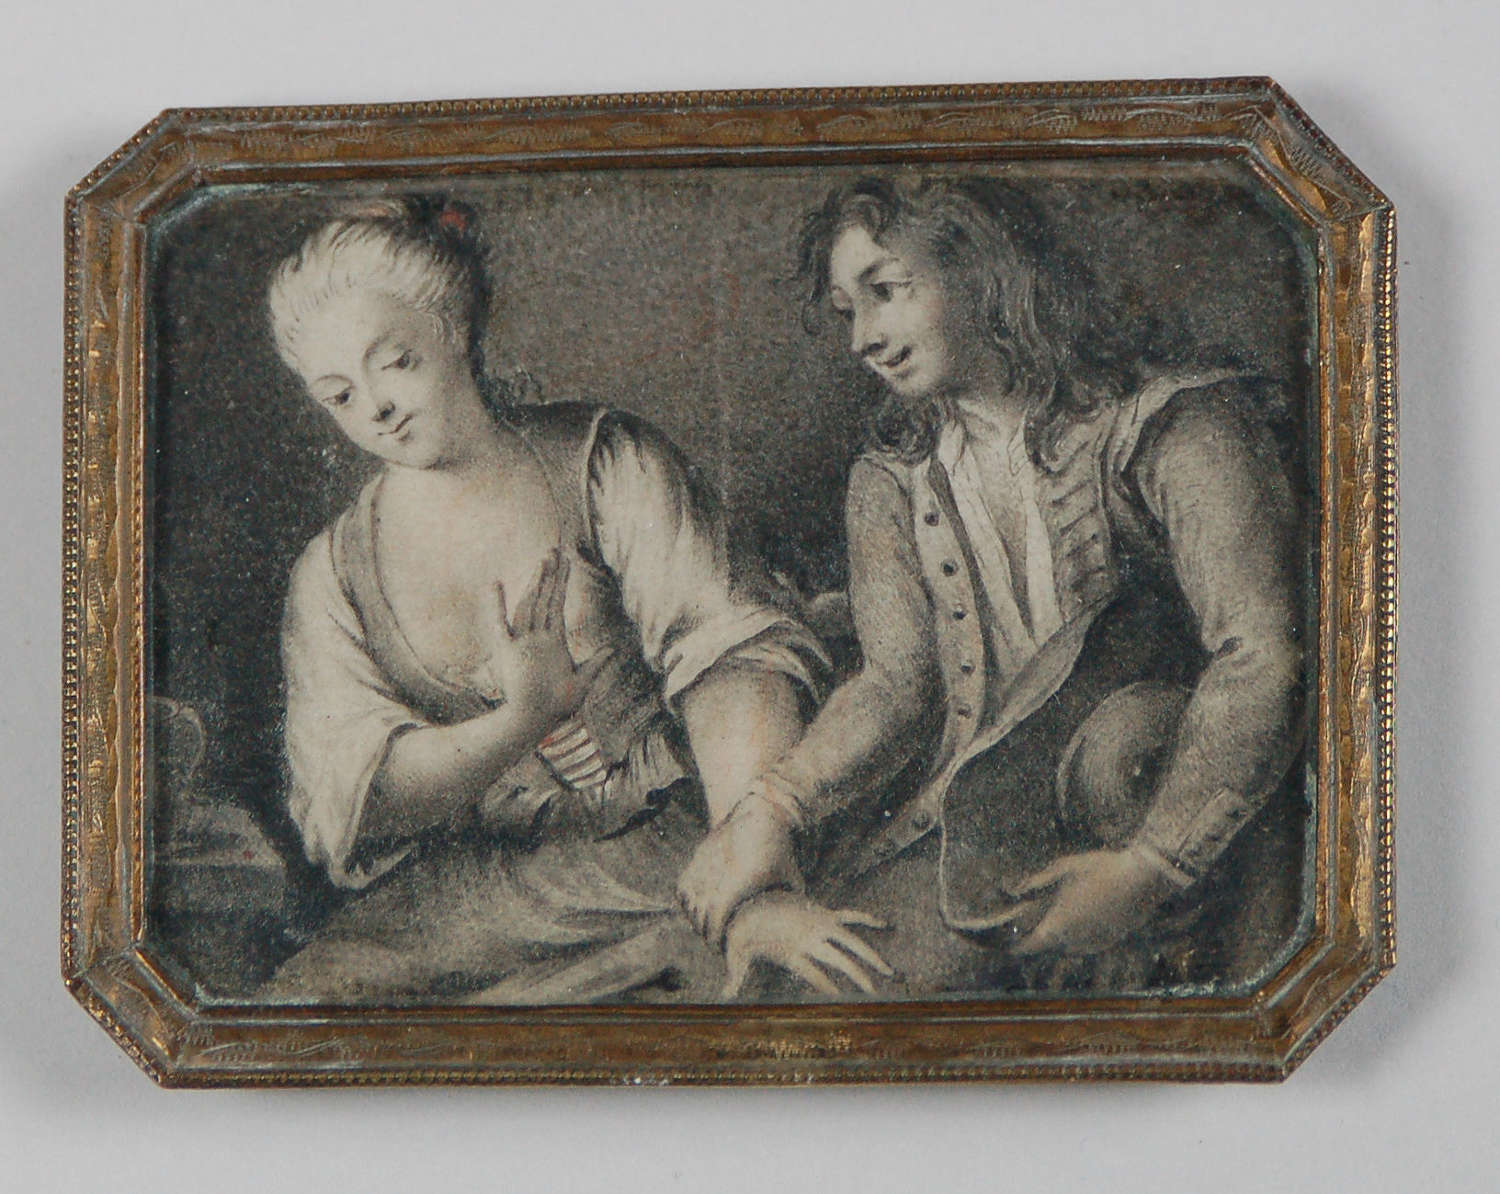 Monochrome miniature of couple by Klingstedt C1720